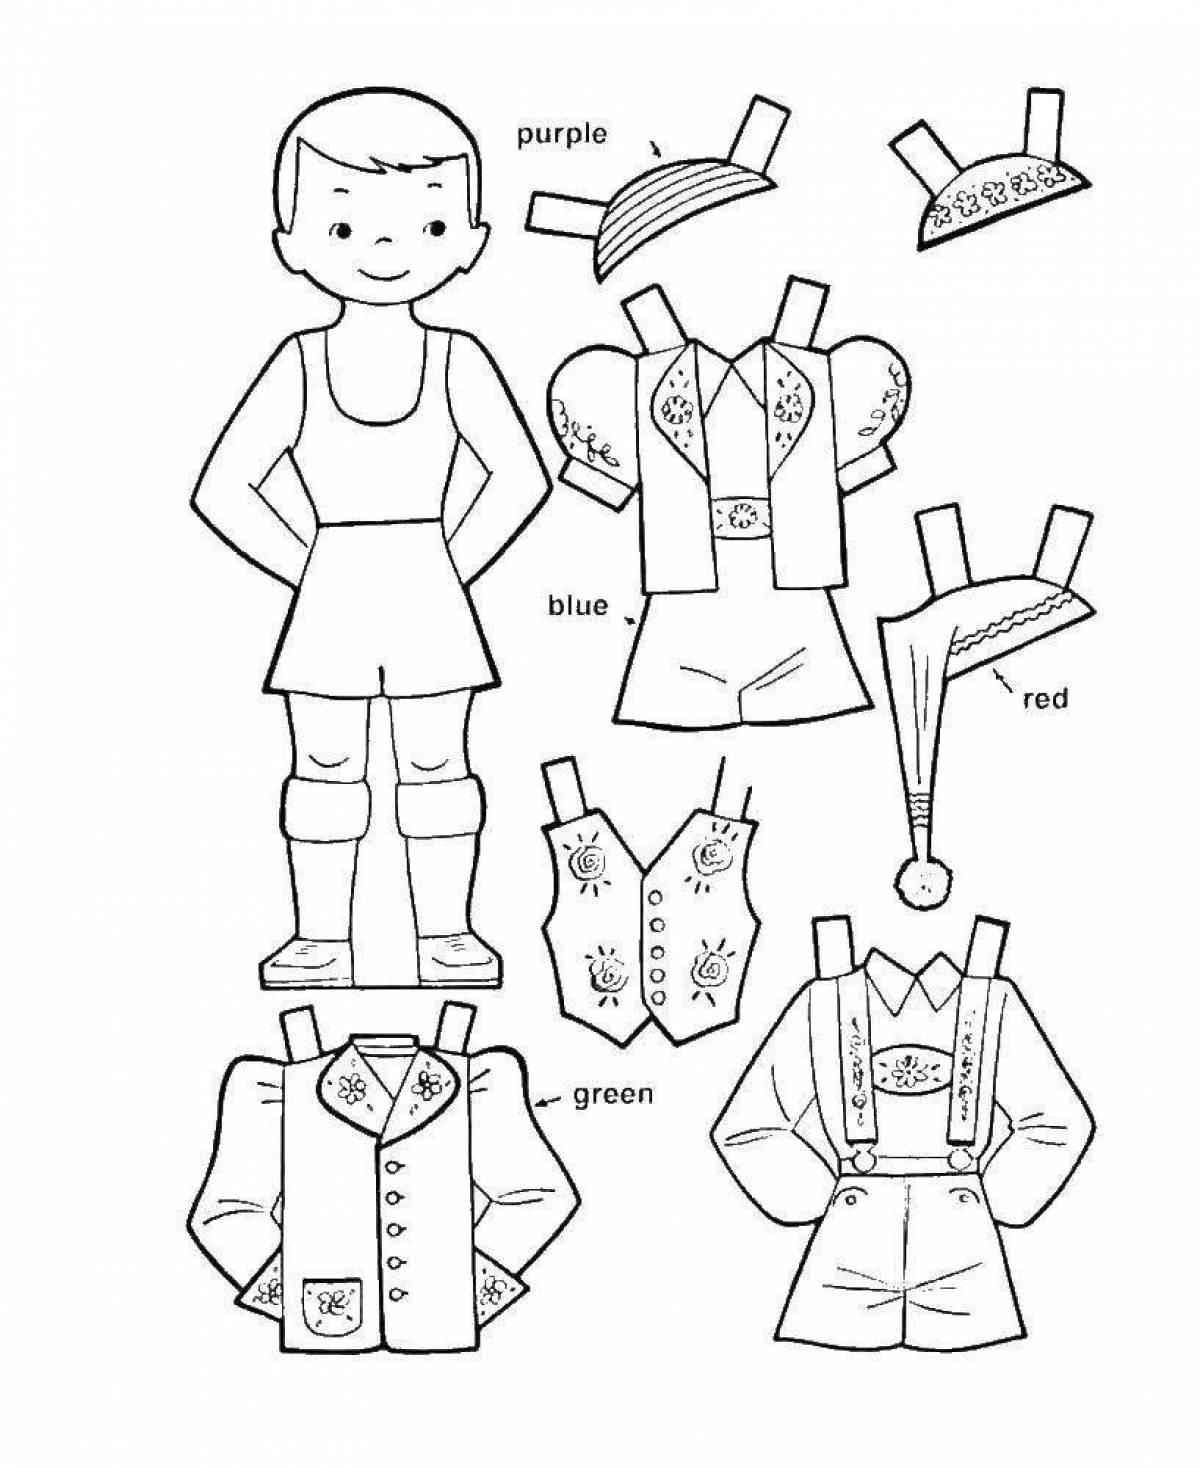 Cute paper doll boy with clothes to cut out